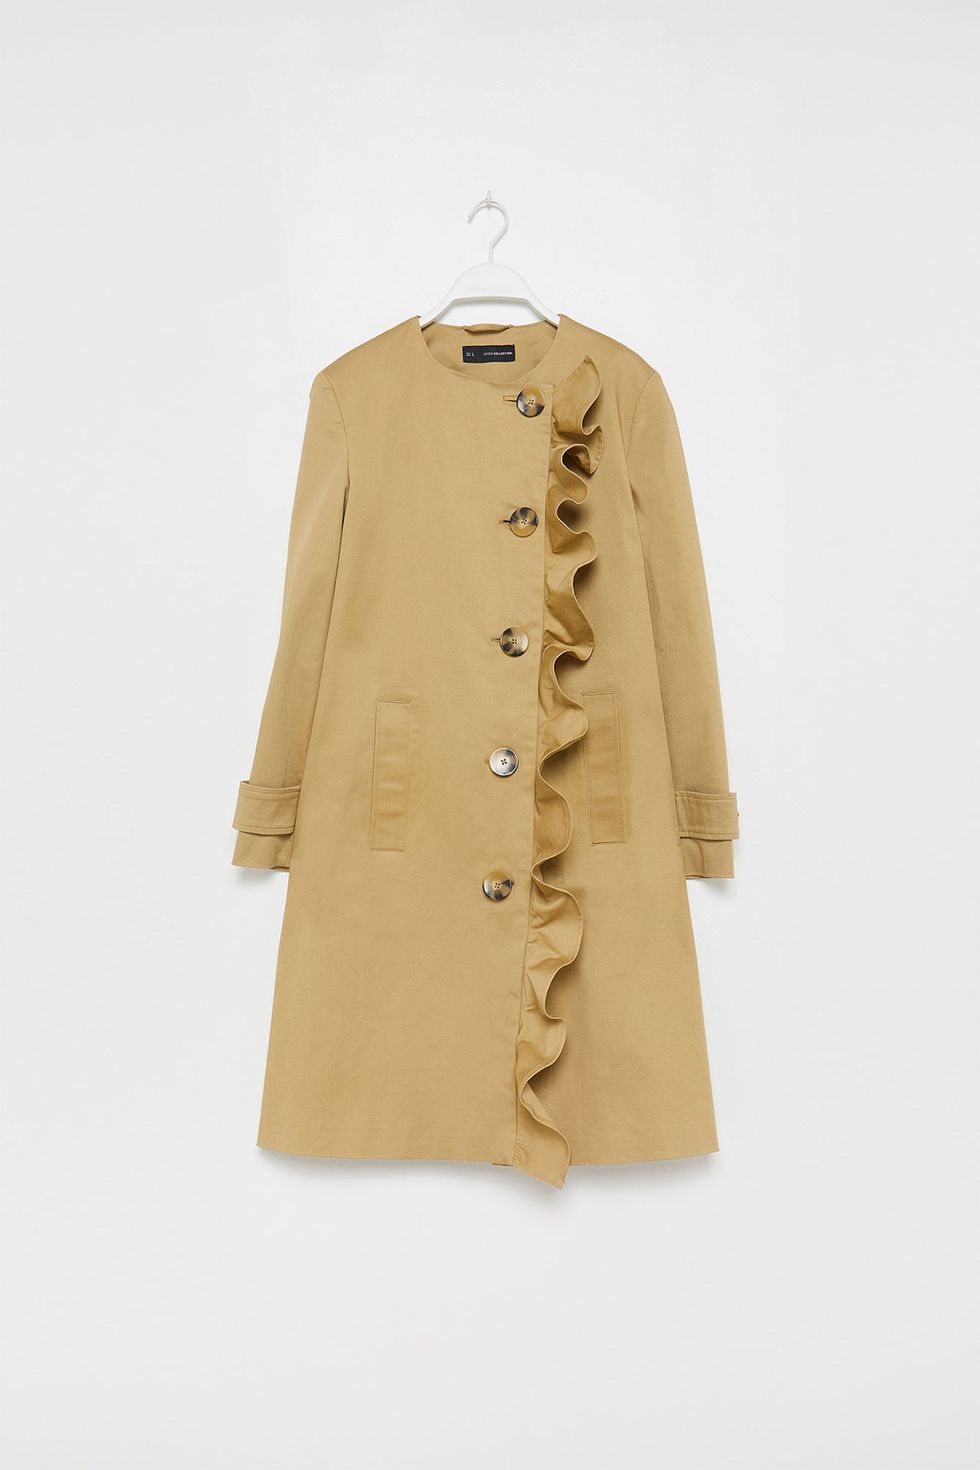 Clothing, Outerwear, Coat, Beige, Sleeve, Trench coat, Overcoat, Button, Jacket, Clothes hanger, 